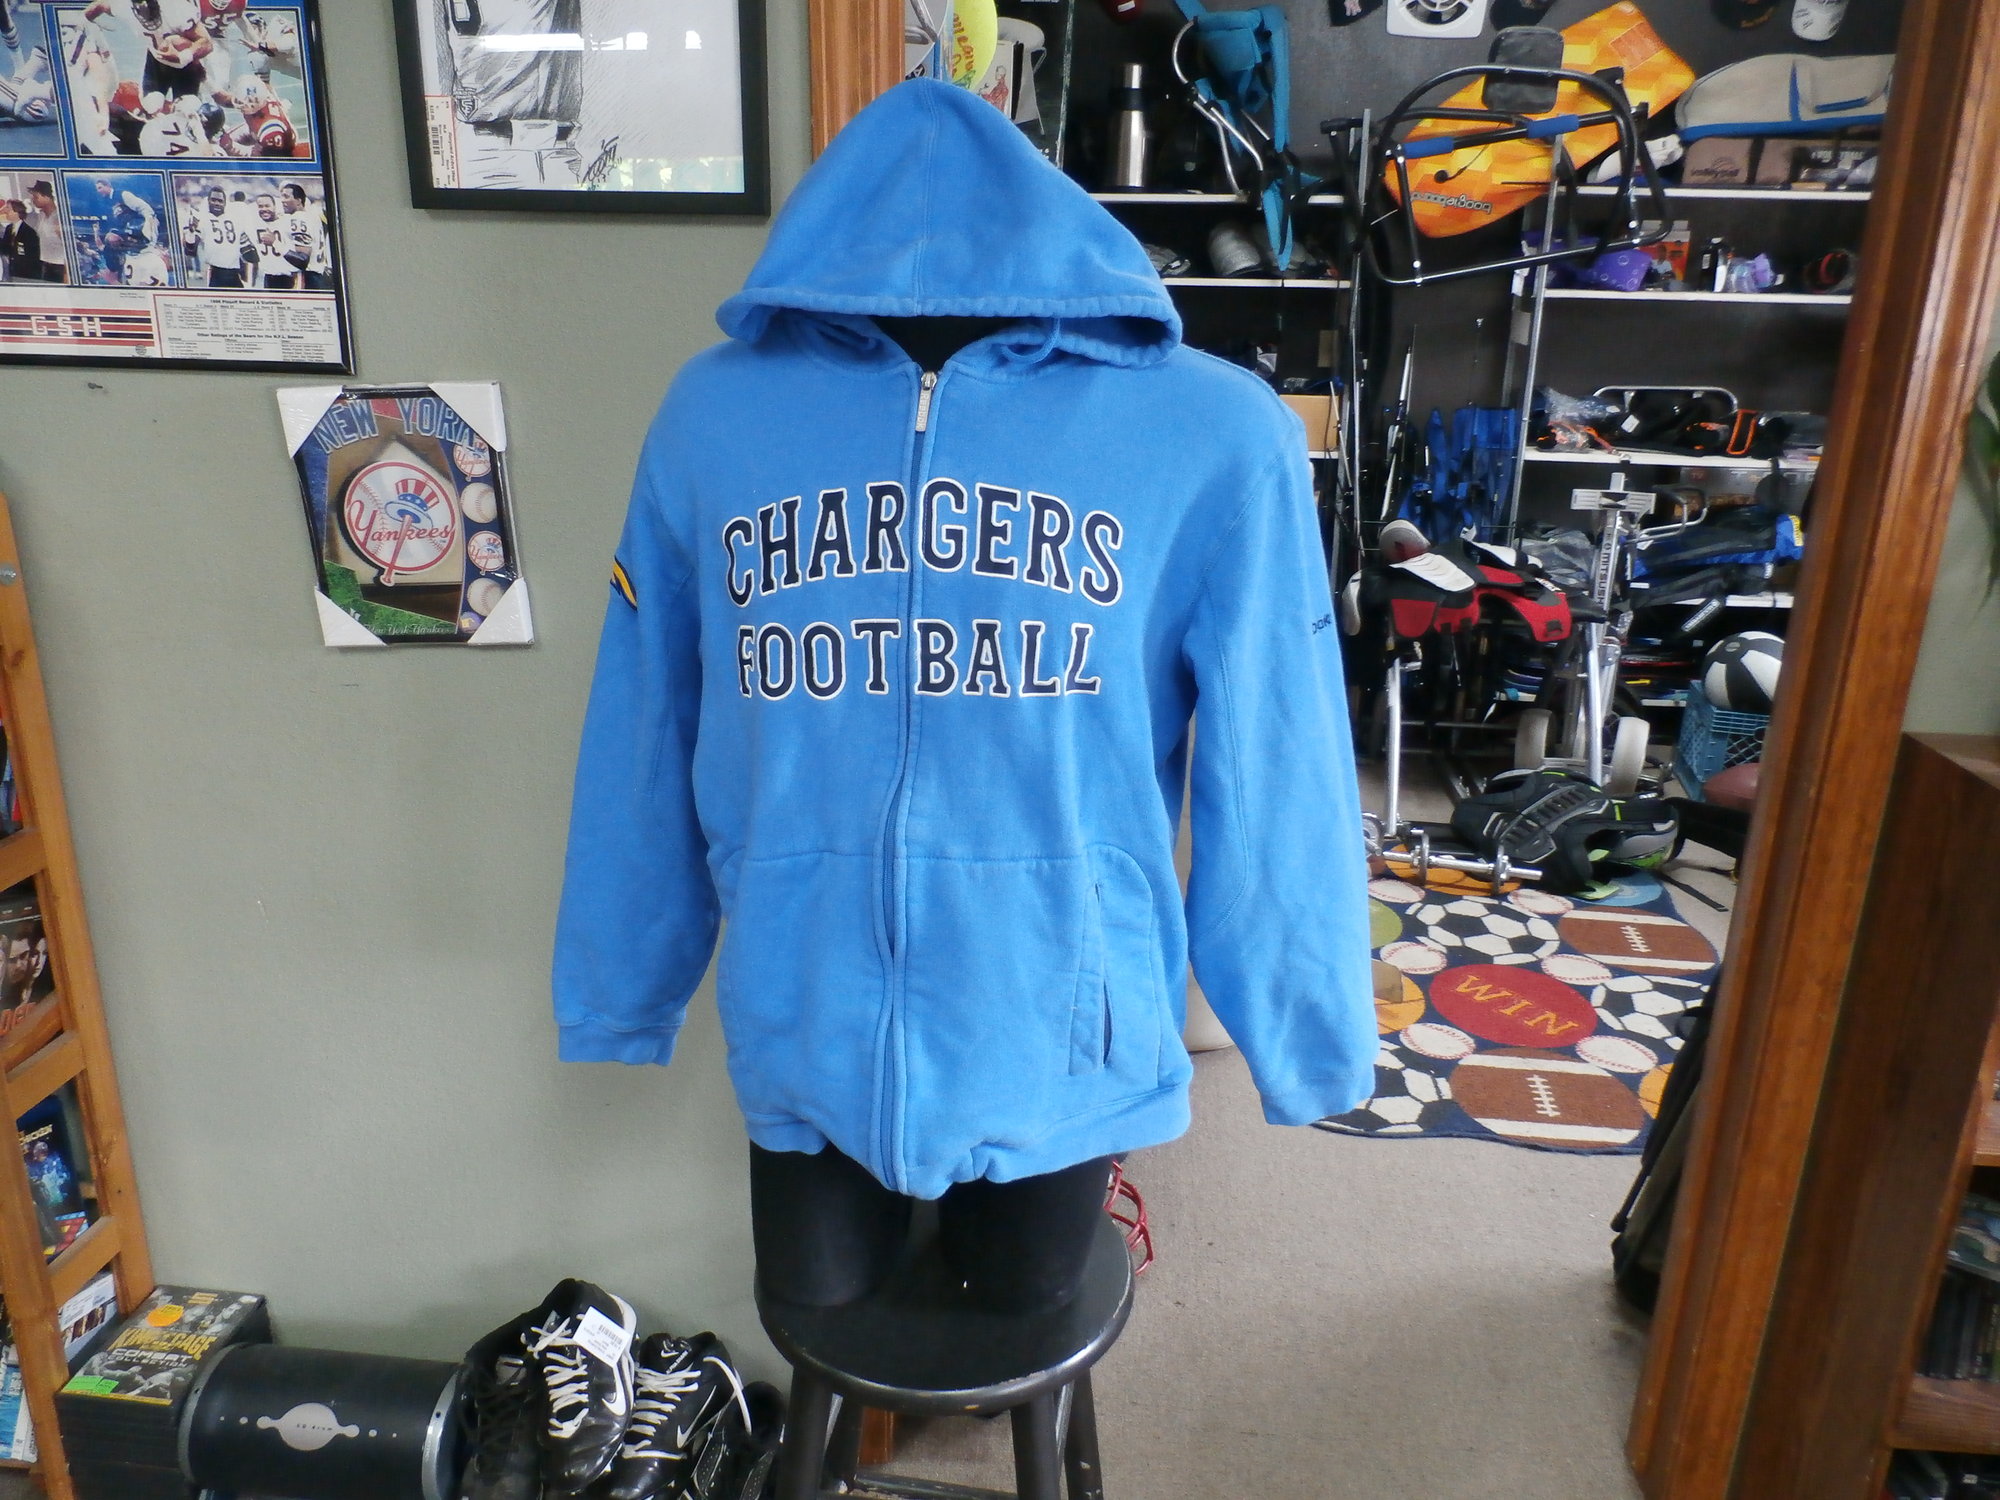 san diego chargers sweater